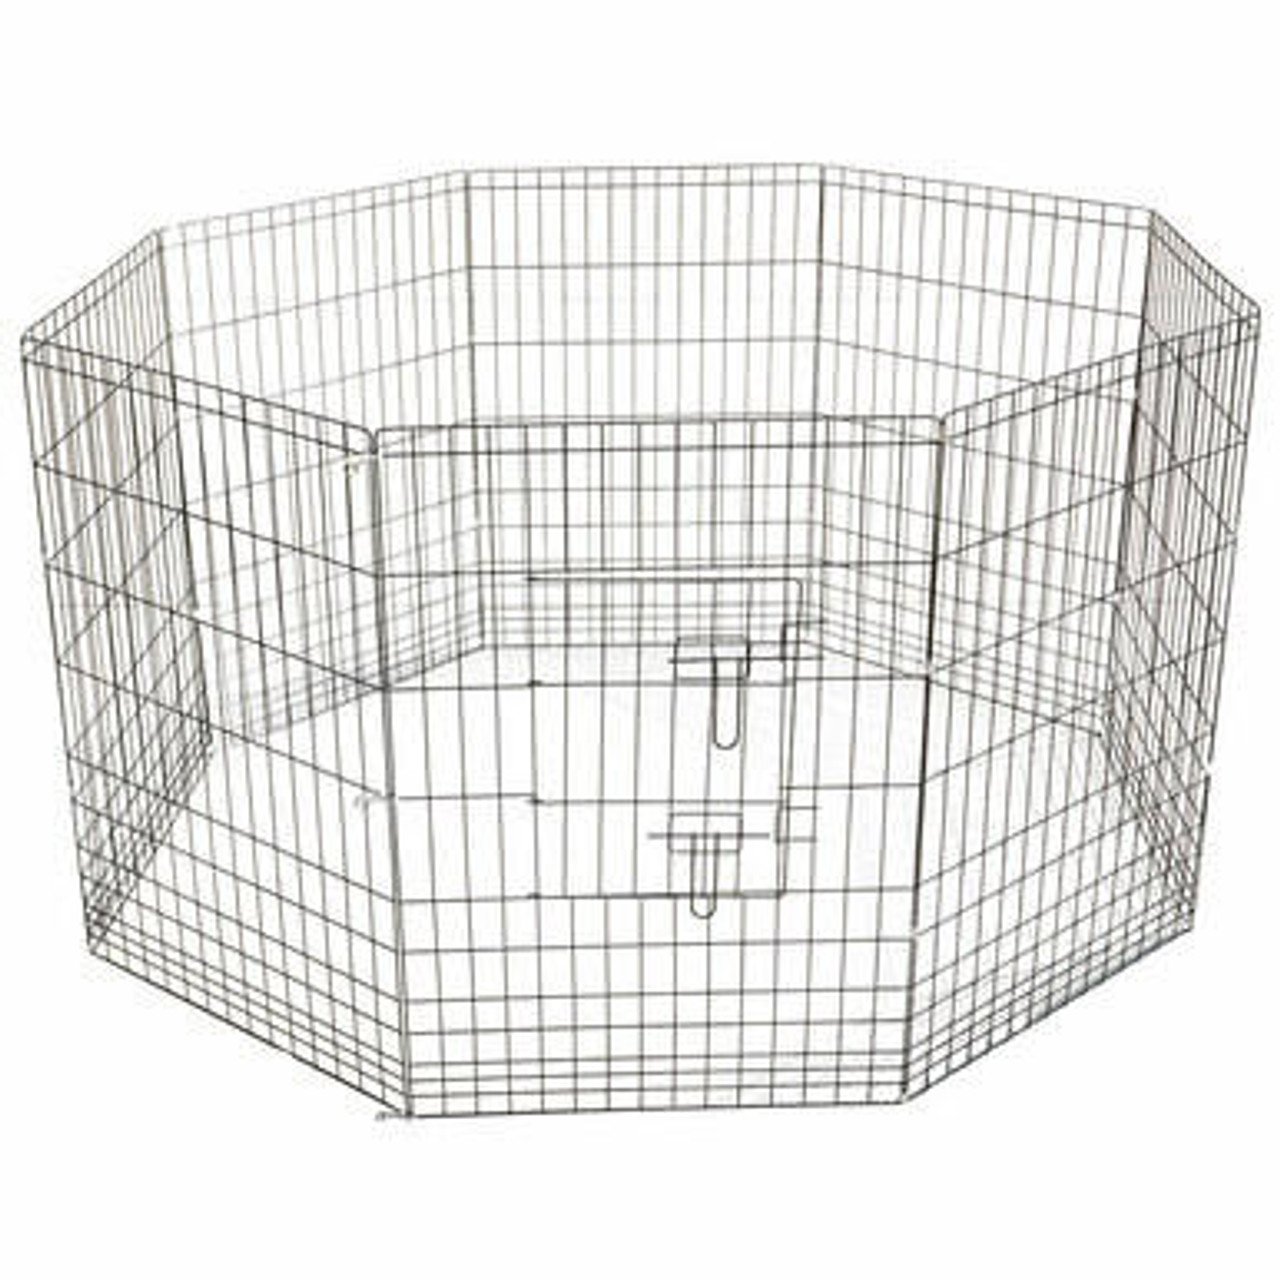 GQF Stacked Grow Off Pen, One for Birds & Chicks GQF Stacked Grow Off Pen,  One for Birds & Chicks